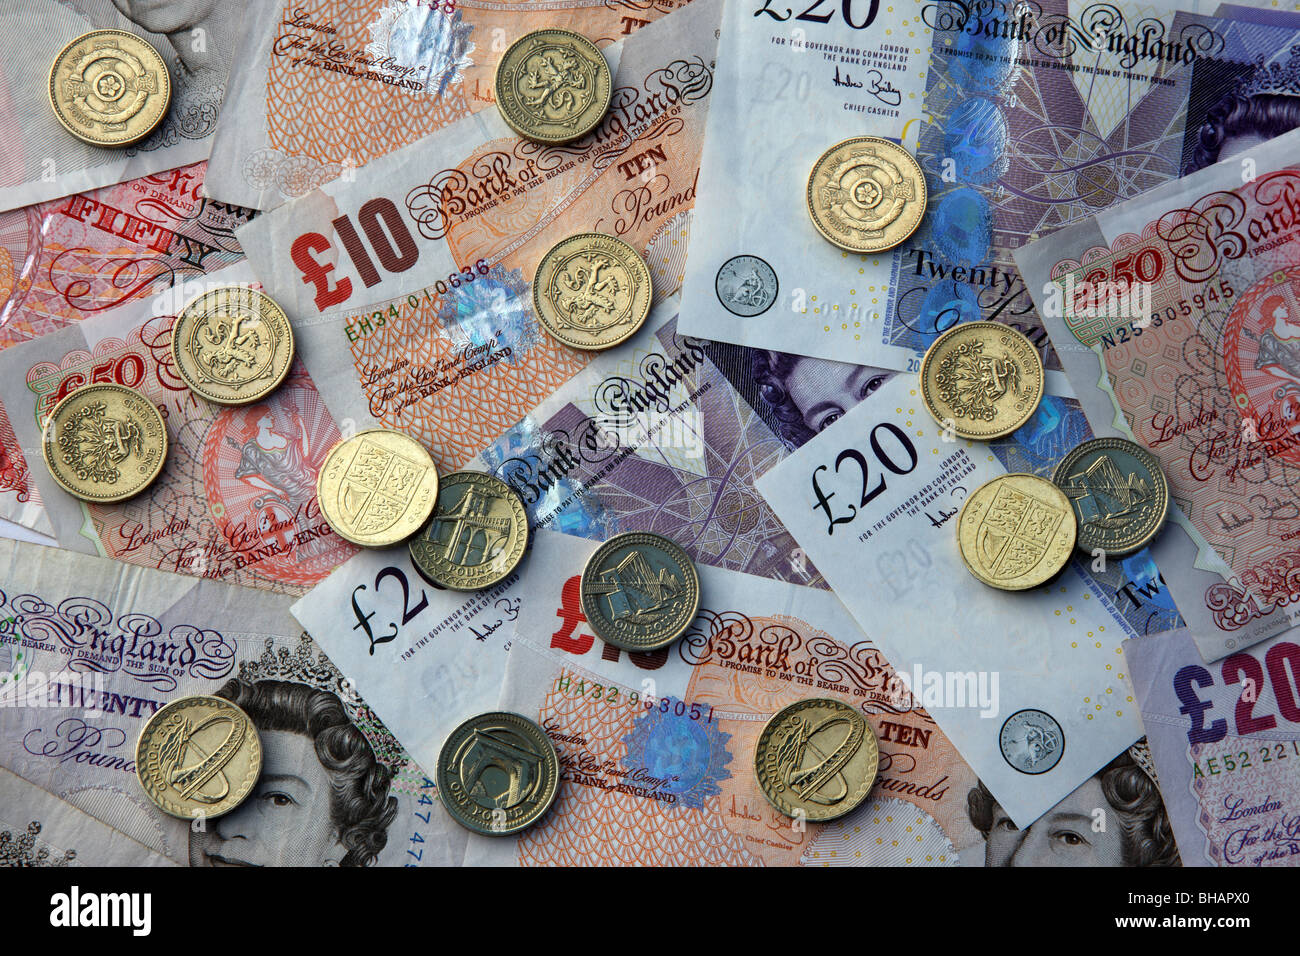 One pound coins scattered on bank notes, fifty, twenty and ten pound notes. Stock Photo